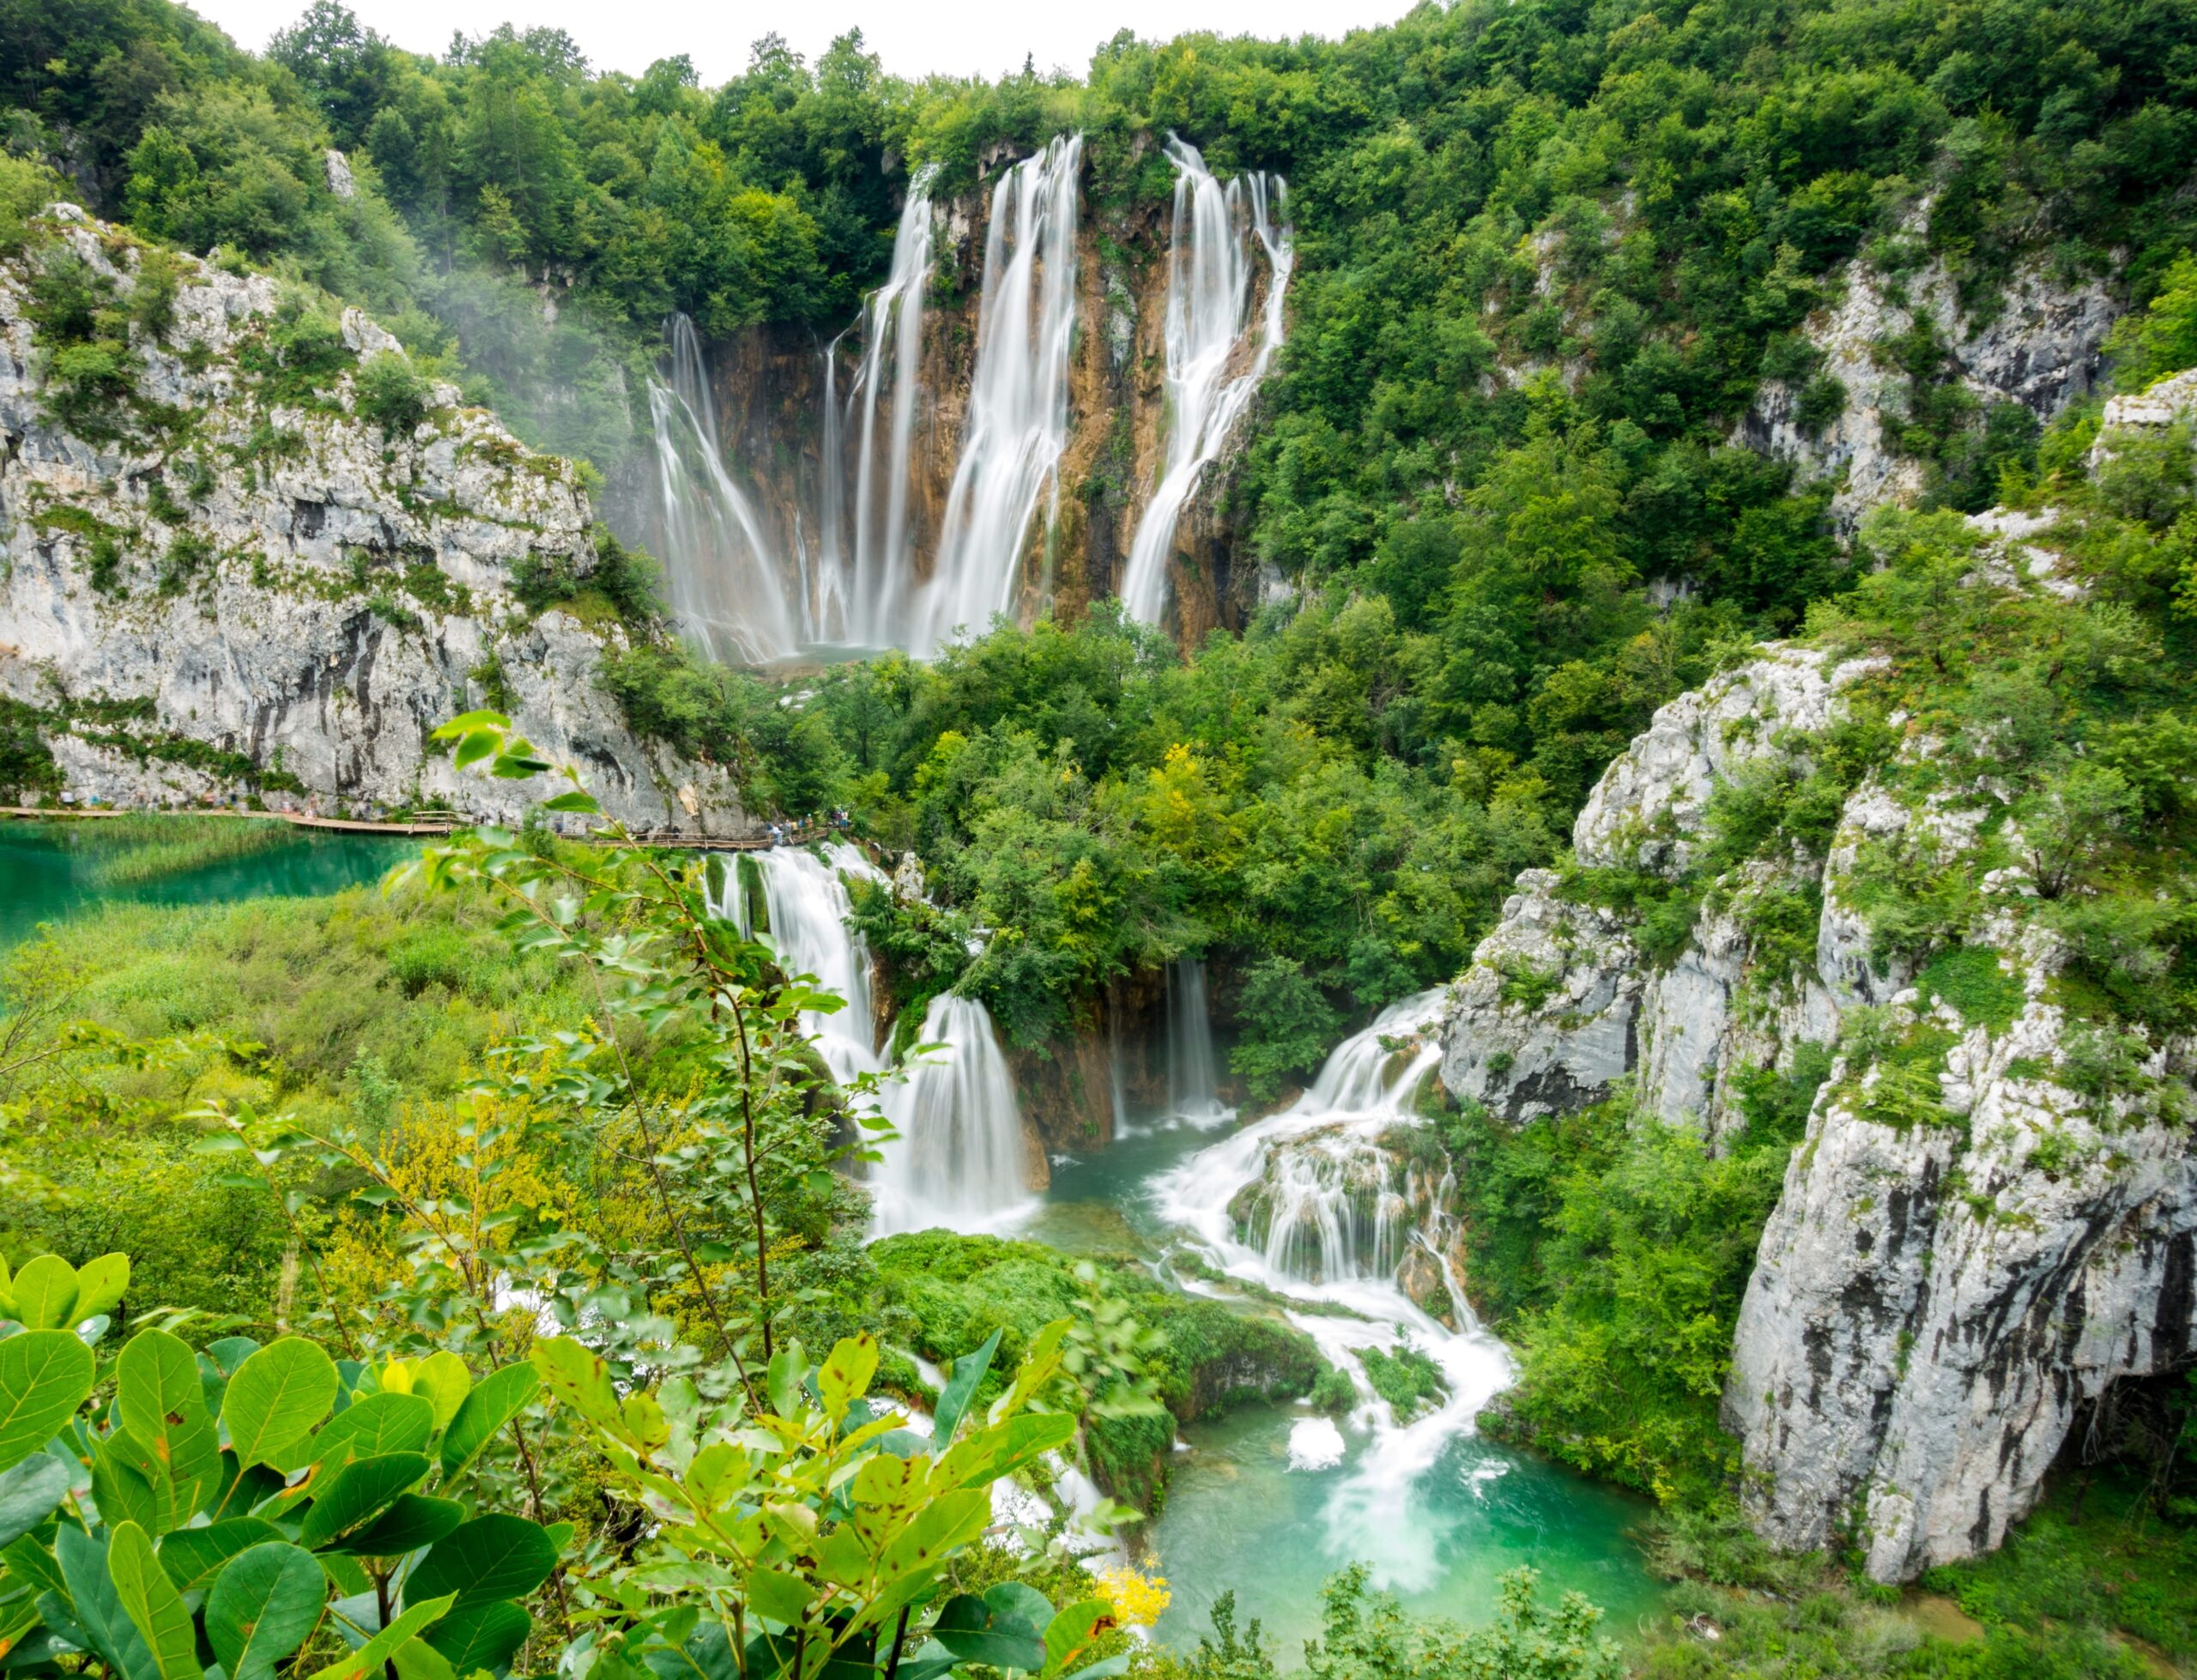 The magical waterfalls in Plitvice Lakes National Park located in Croatia